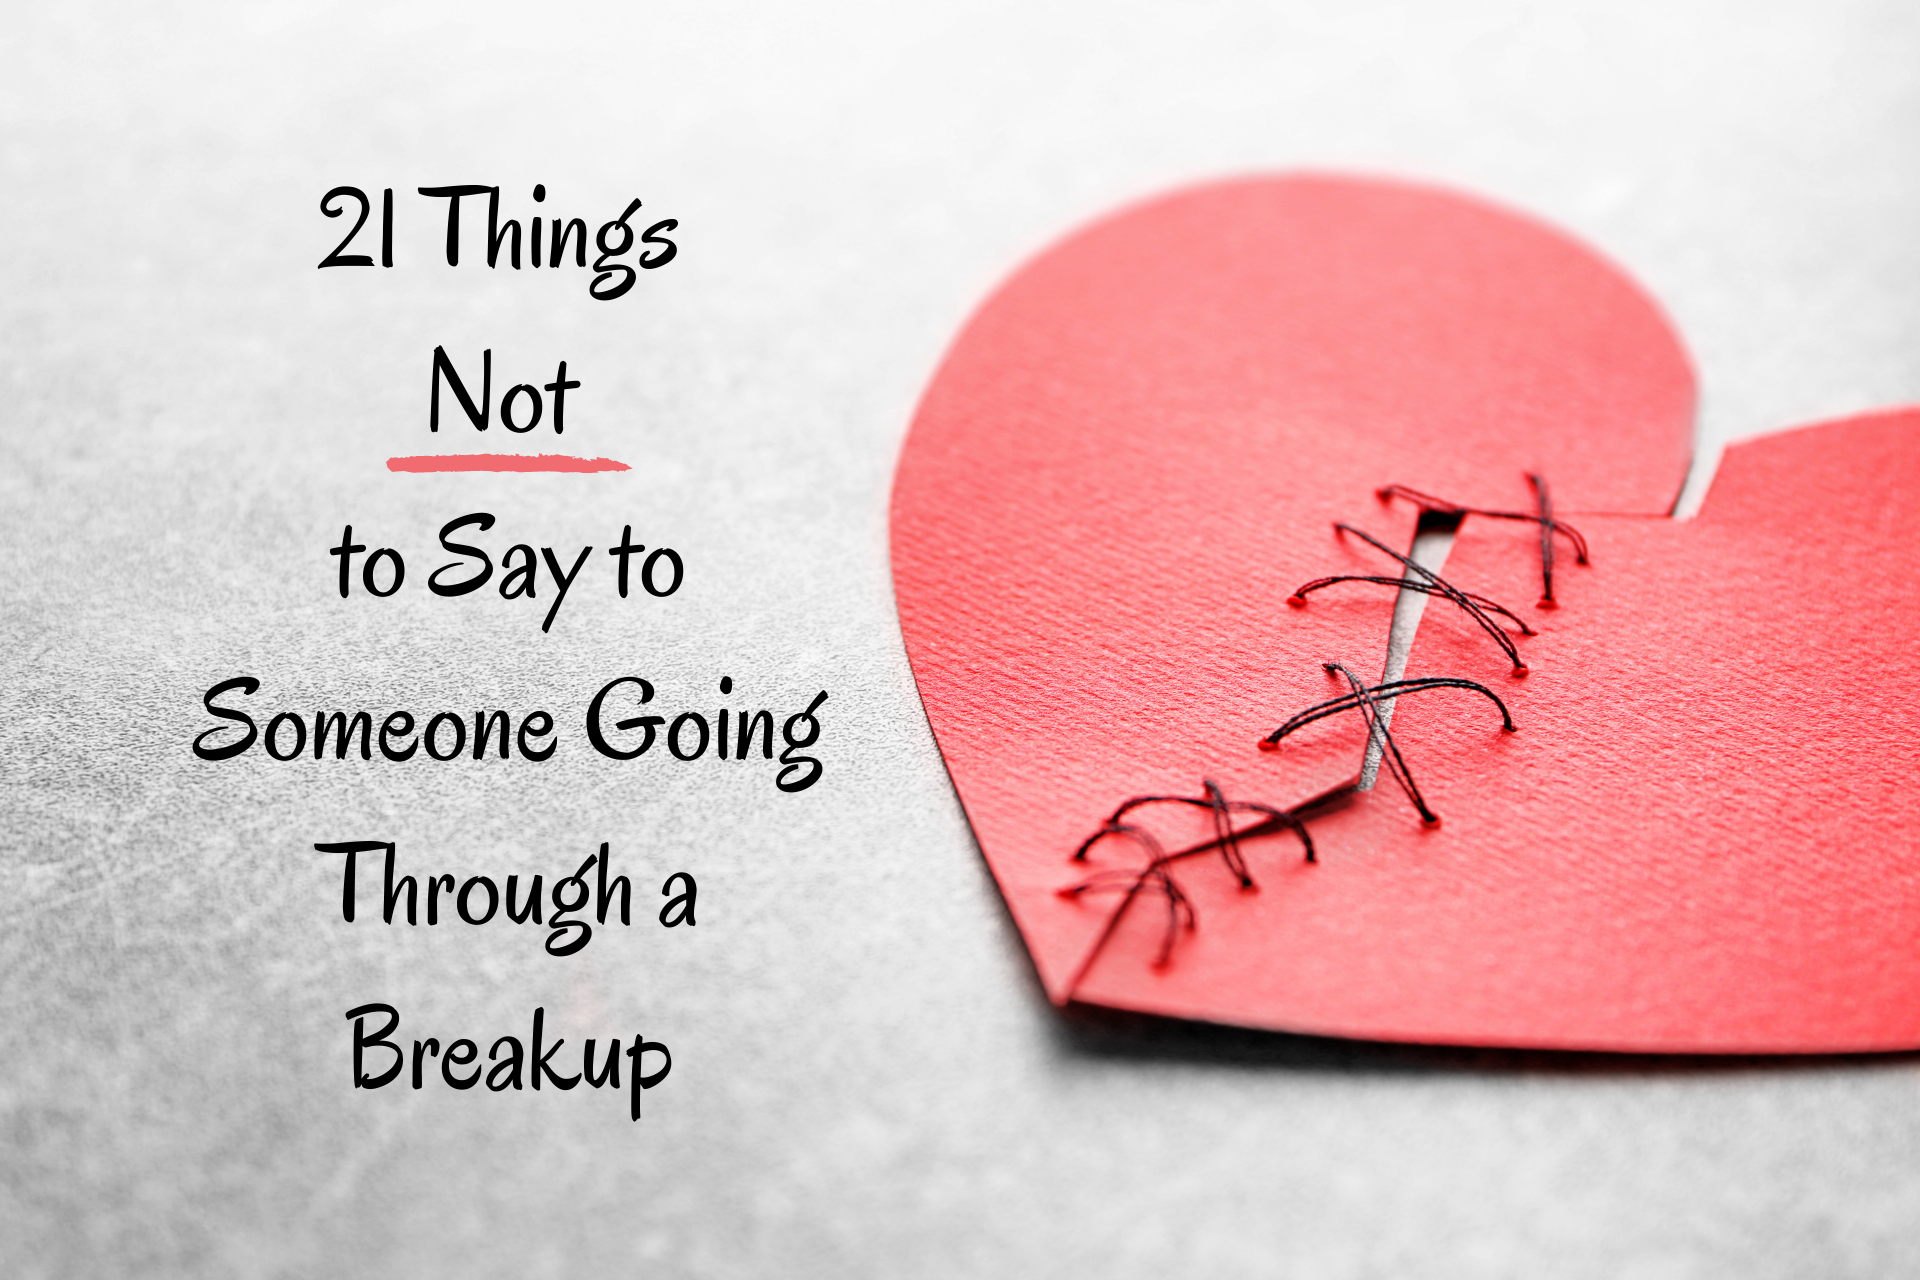 21 Things Not to Say to Someone Going Through a Breakup - Th